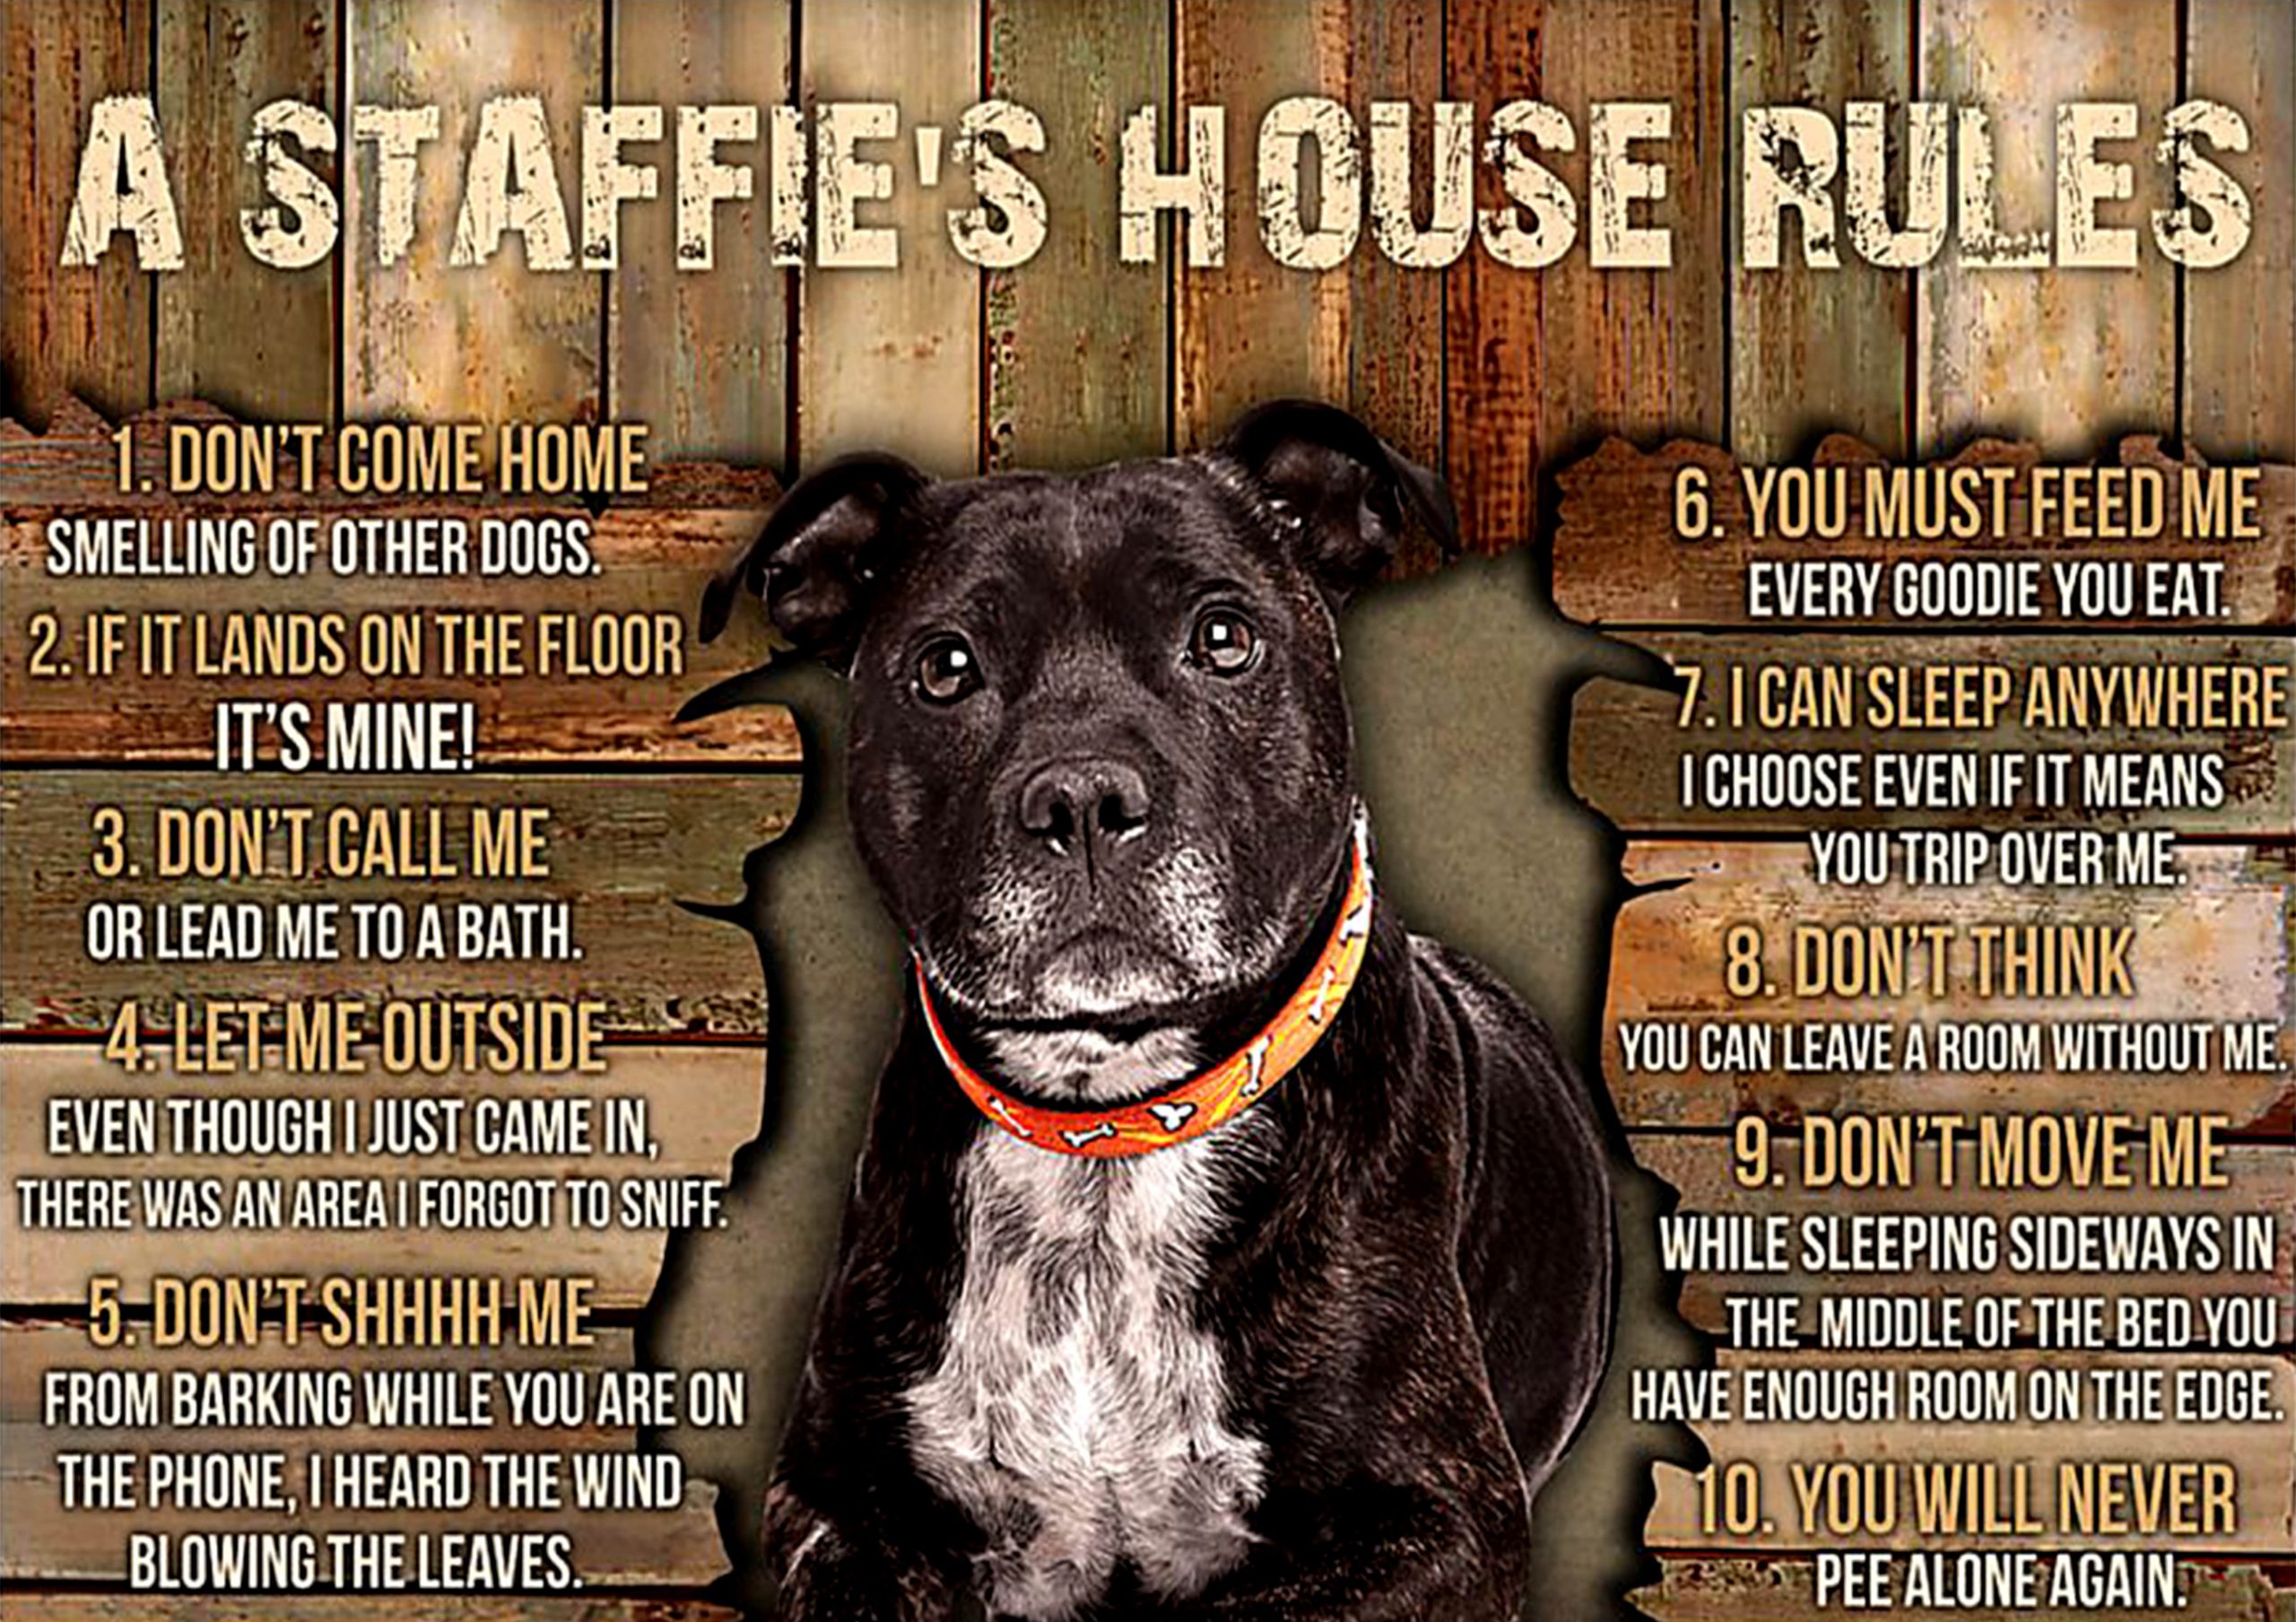 dog lover a staffies house rules poster 1 - Copy (3)